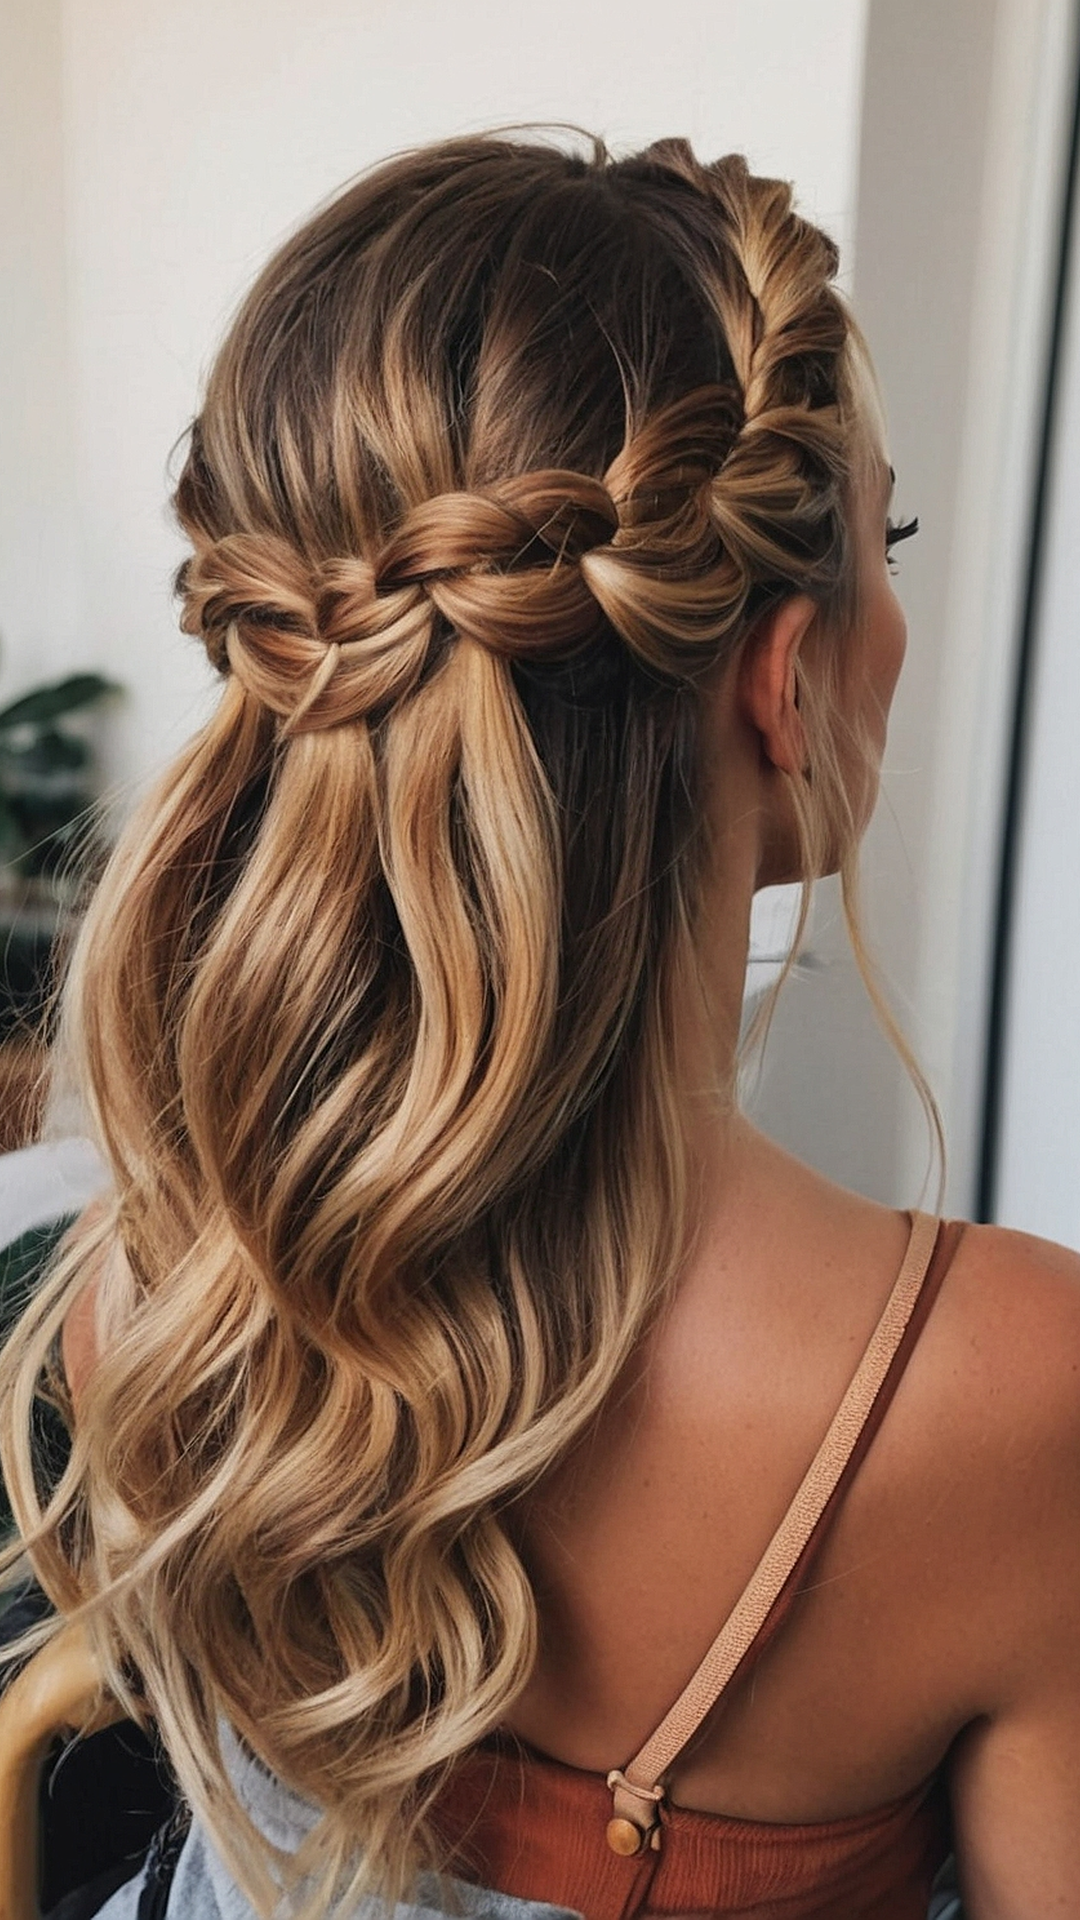 Daring Braids: Unique Hairstyle Innovations